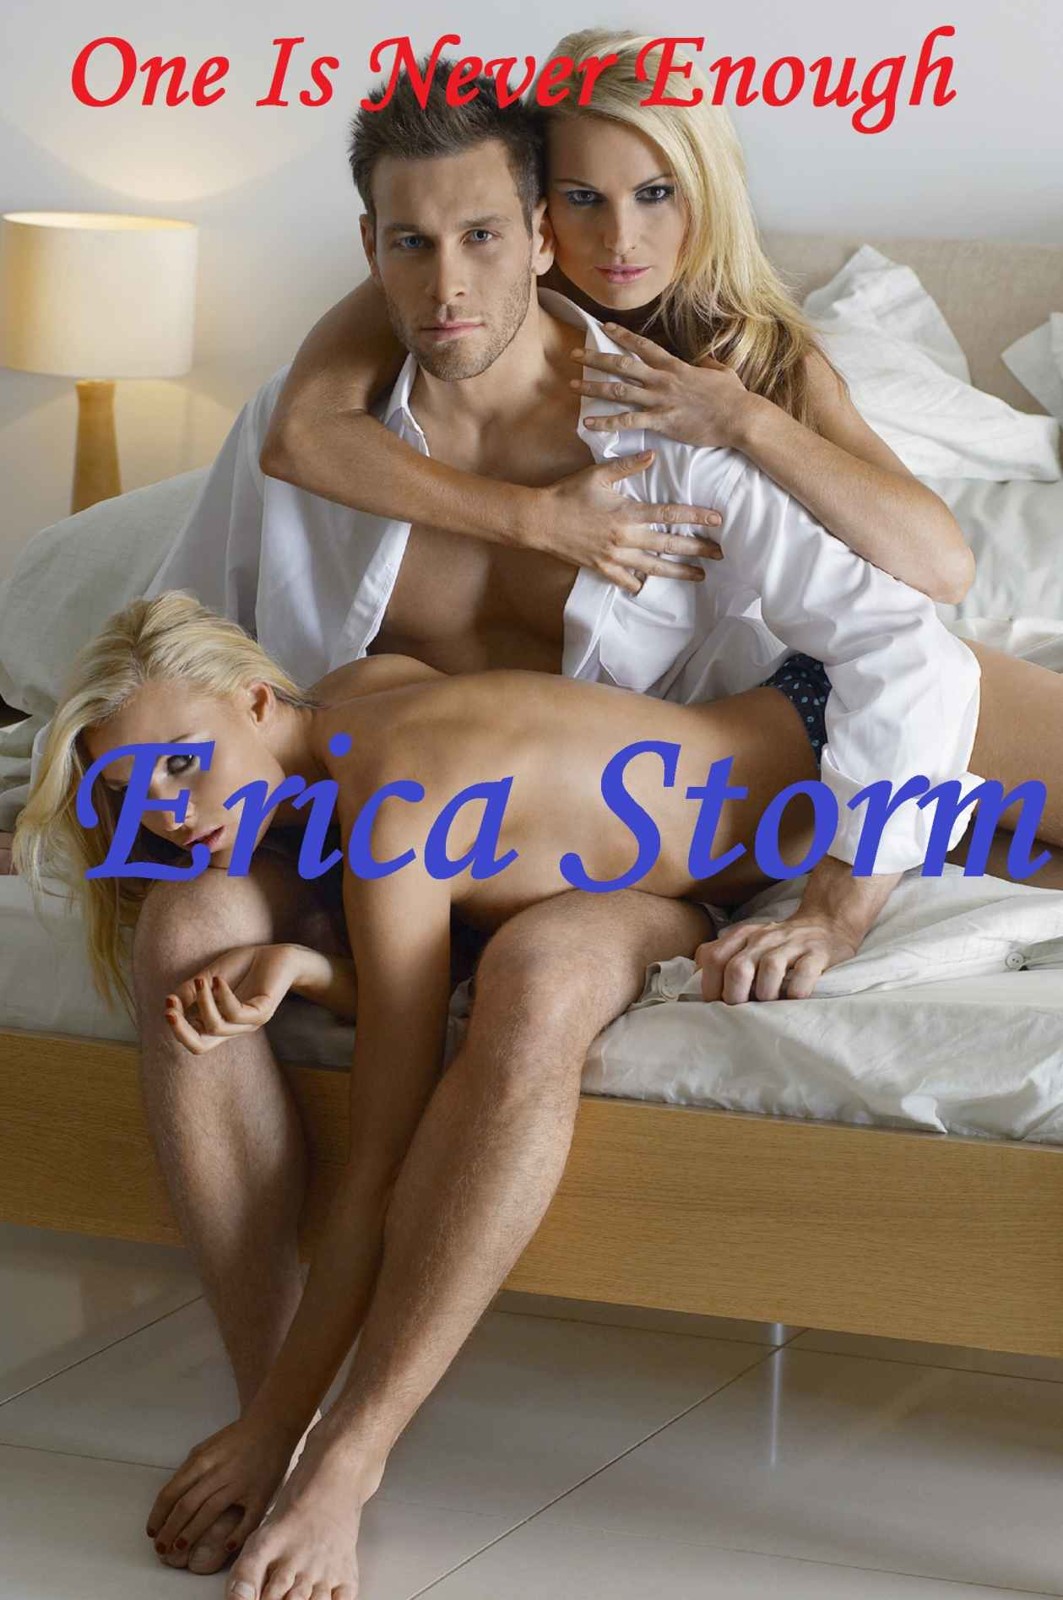 One Is Never Enough by Erica Storm